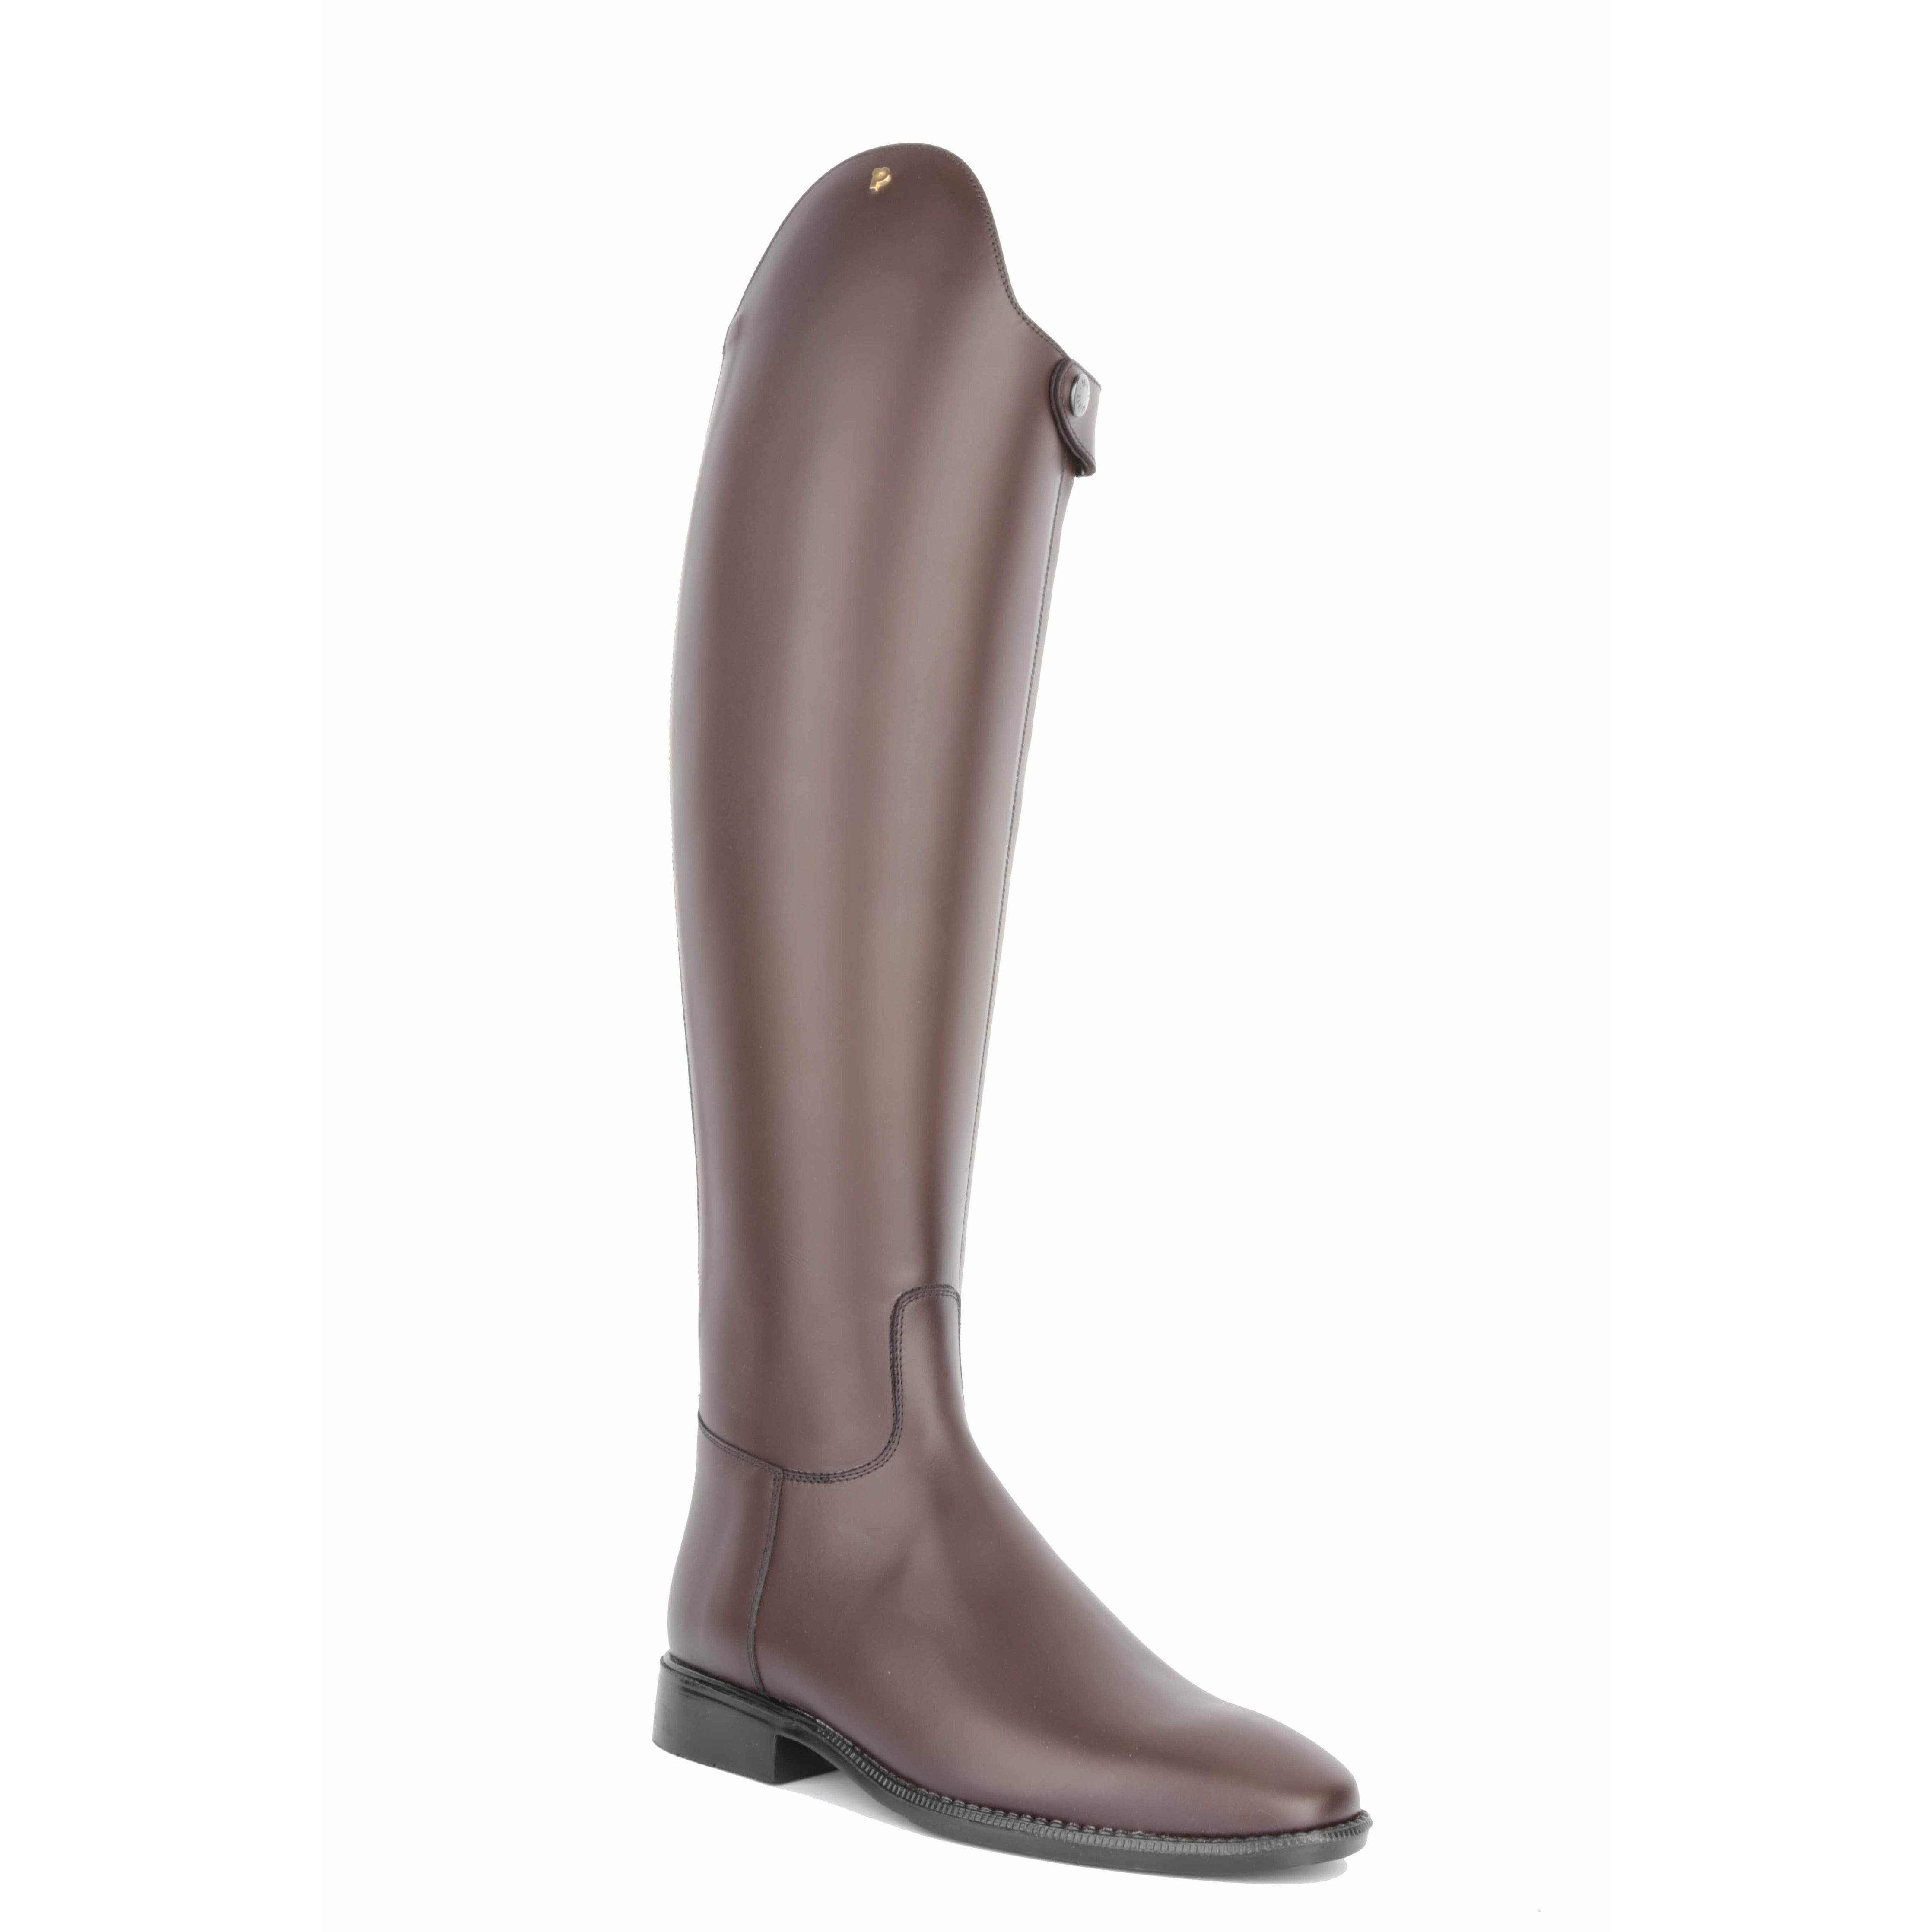 Petrie Padova Boot - Brown - we have some stock but most sizes are to order